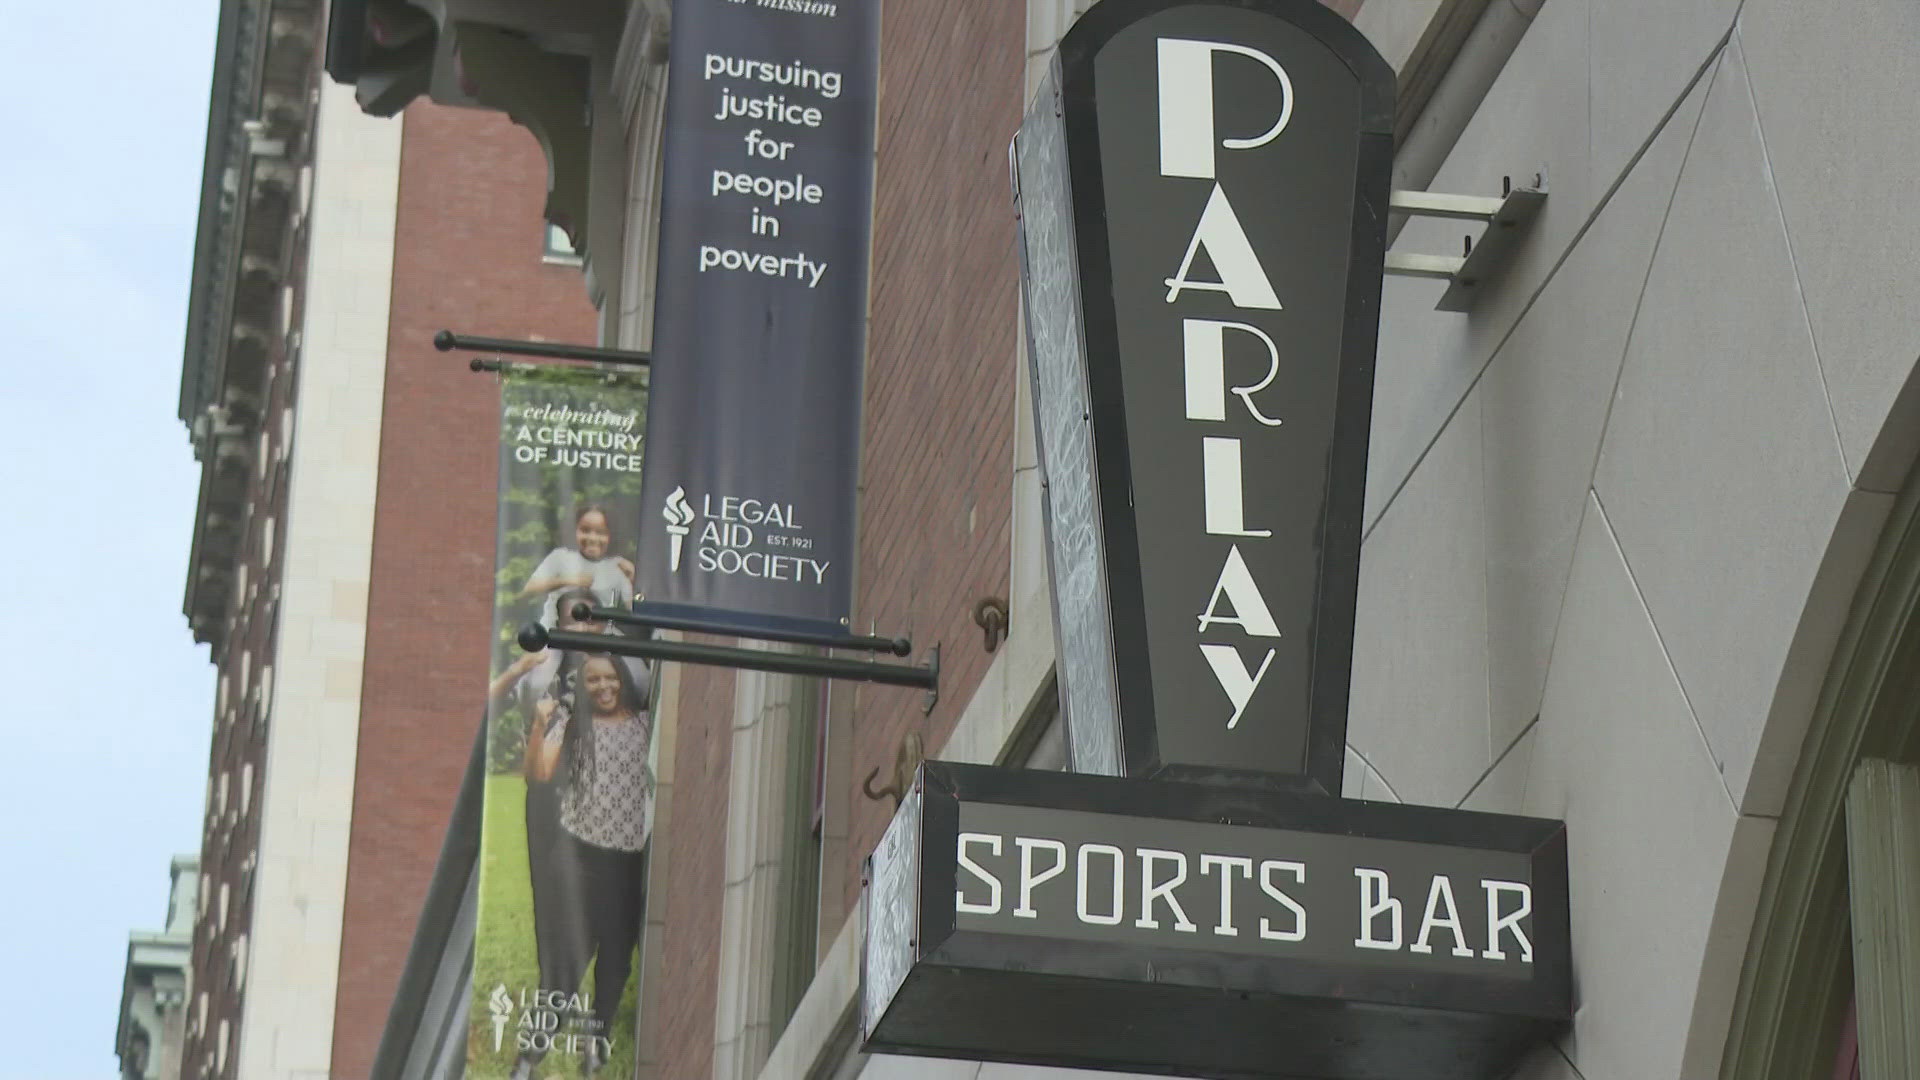 Louisville hotels, short-term stays and businesses are seeing a boost as tourists flock to the city for this week's PGA Championship at Valhalla.